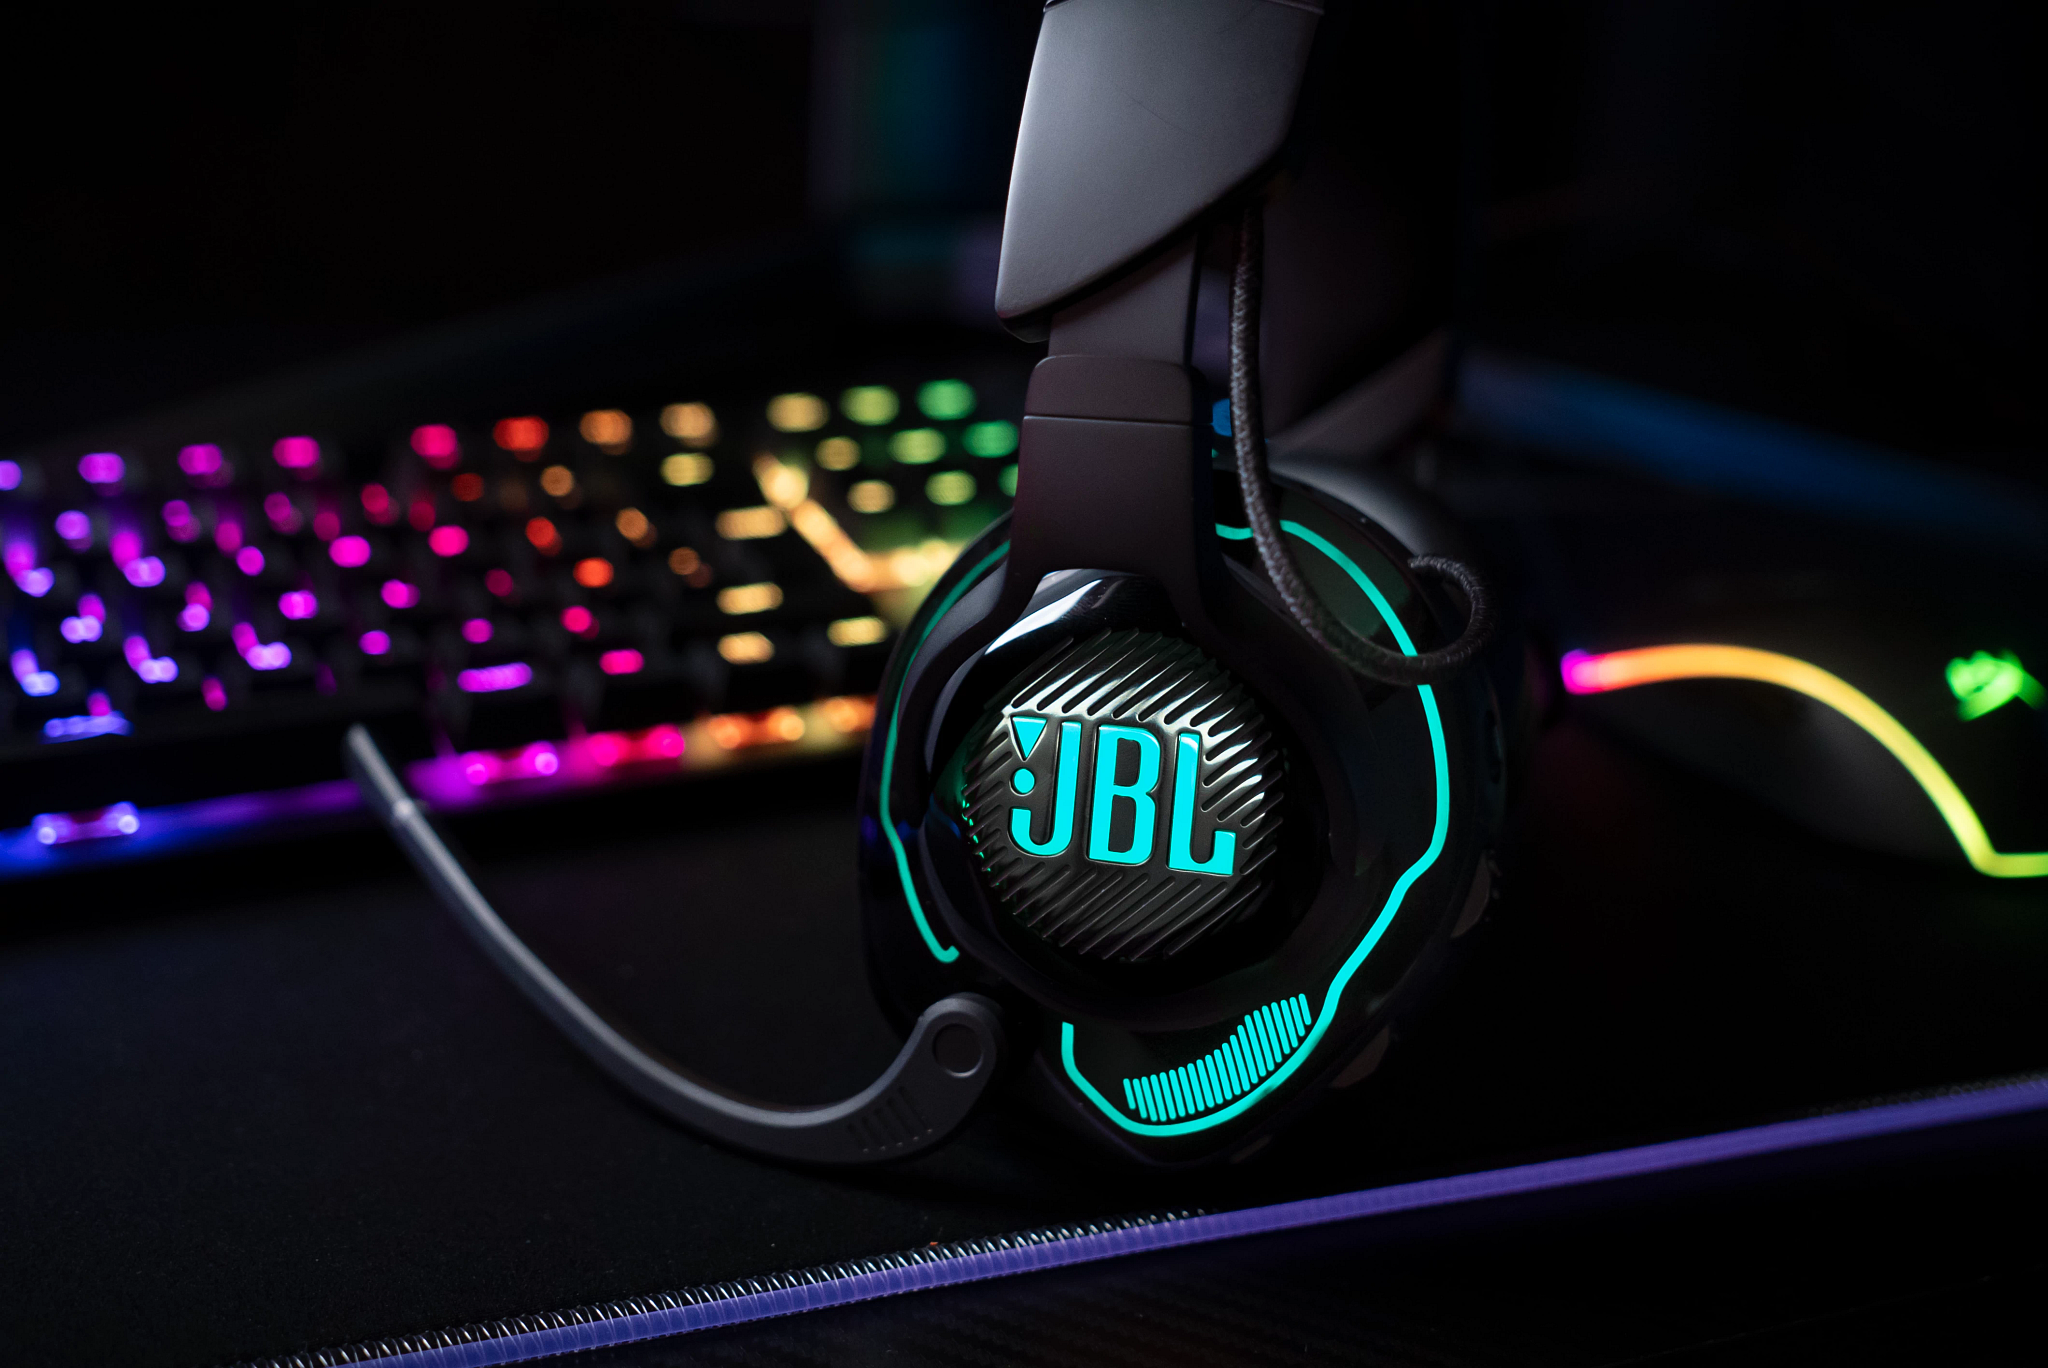 JBL's Quantum 910 Wireless headset delivers immersive in-game audio